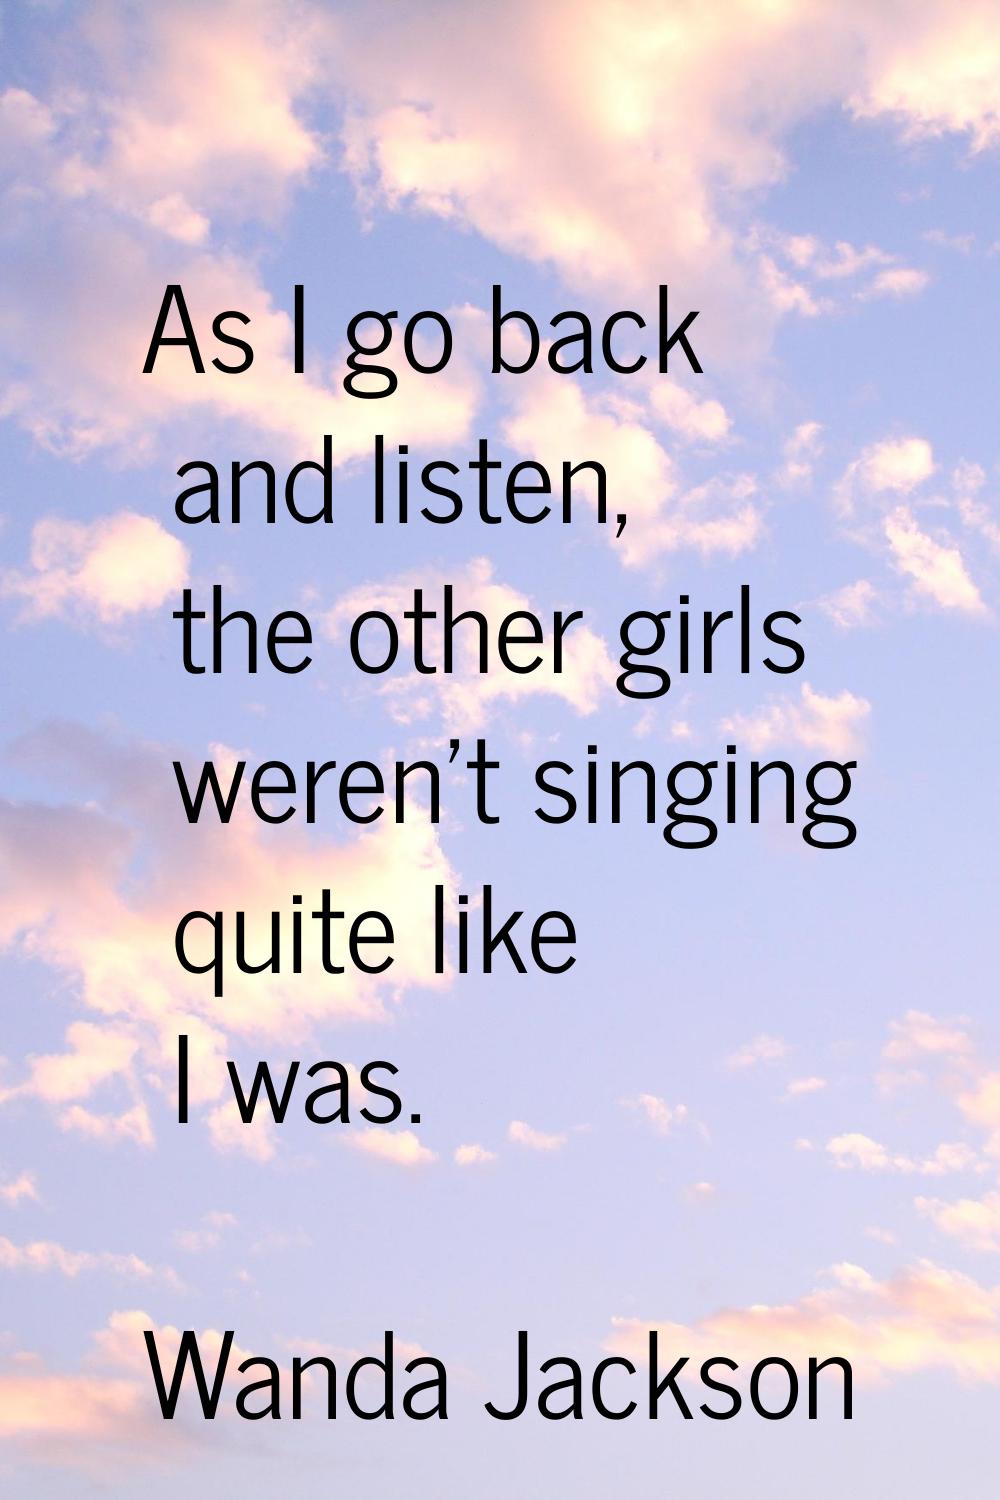 As I go back and listen, the other girls weren't singing quite like I was.